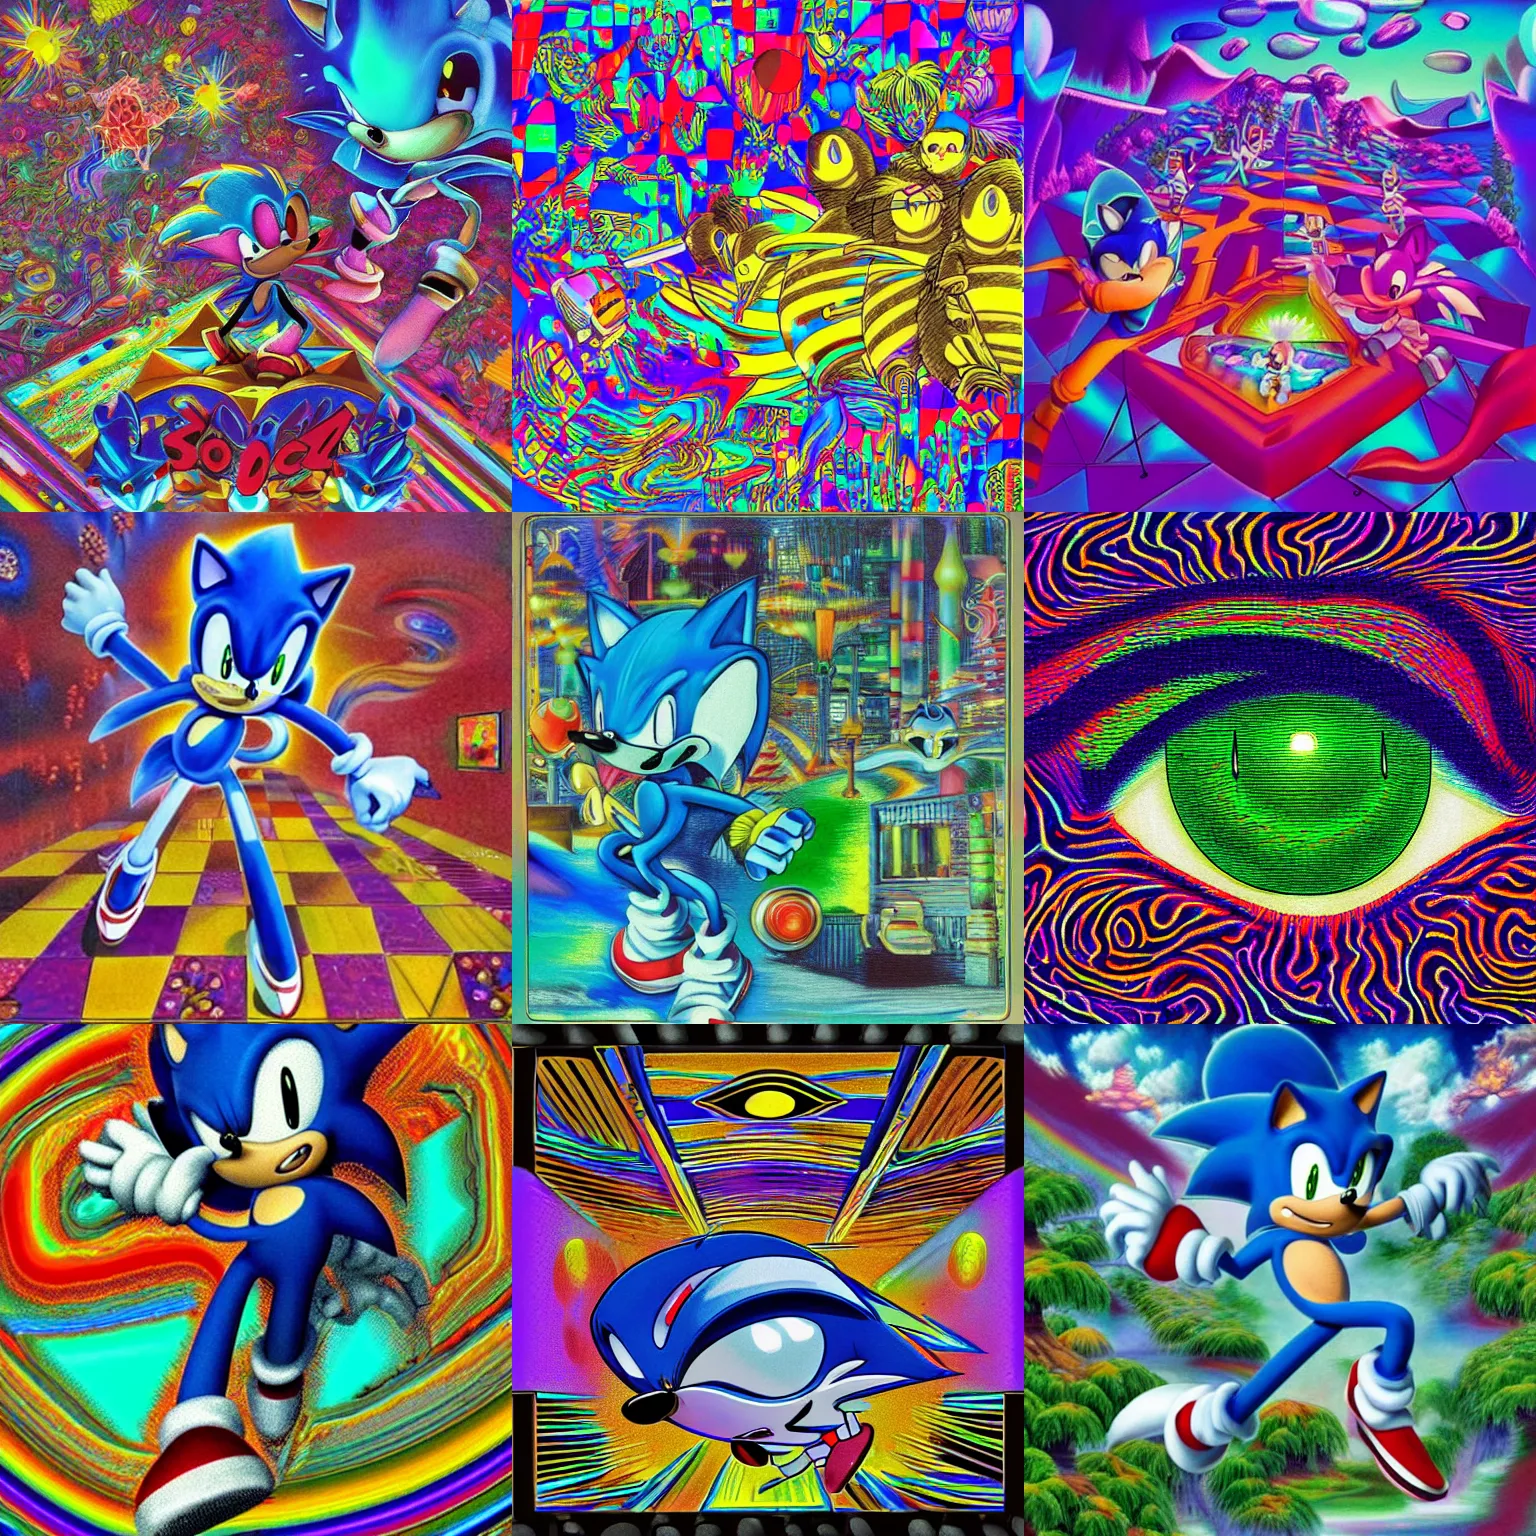 Prompt: too many surreal, sharp, soft pastels, detailed professional, high quality airbrush art mgmt album cover of a sonic liquid dissolving airbrush art lsd open eye visuals dmt sonic the hedgehog channel surfing through cyberspace, iridescent checkerboard background, 1 9 9 0 s 1 9 9 2 sega genesis sonic video game album cover